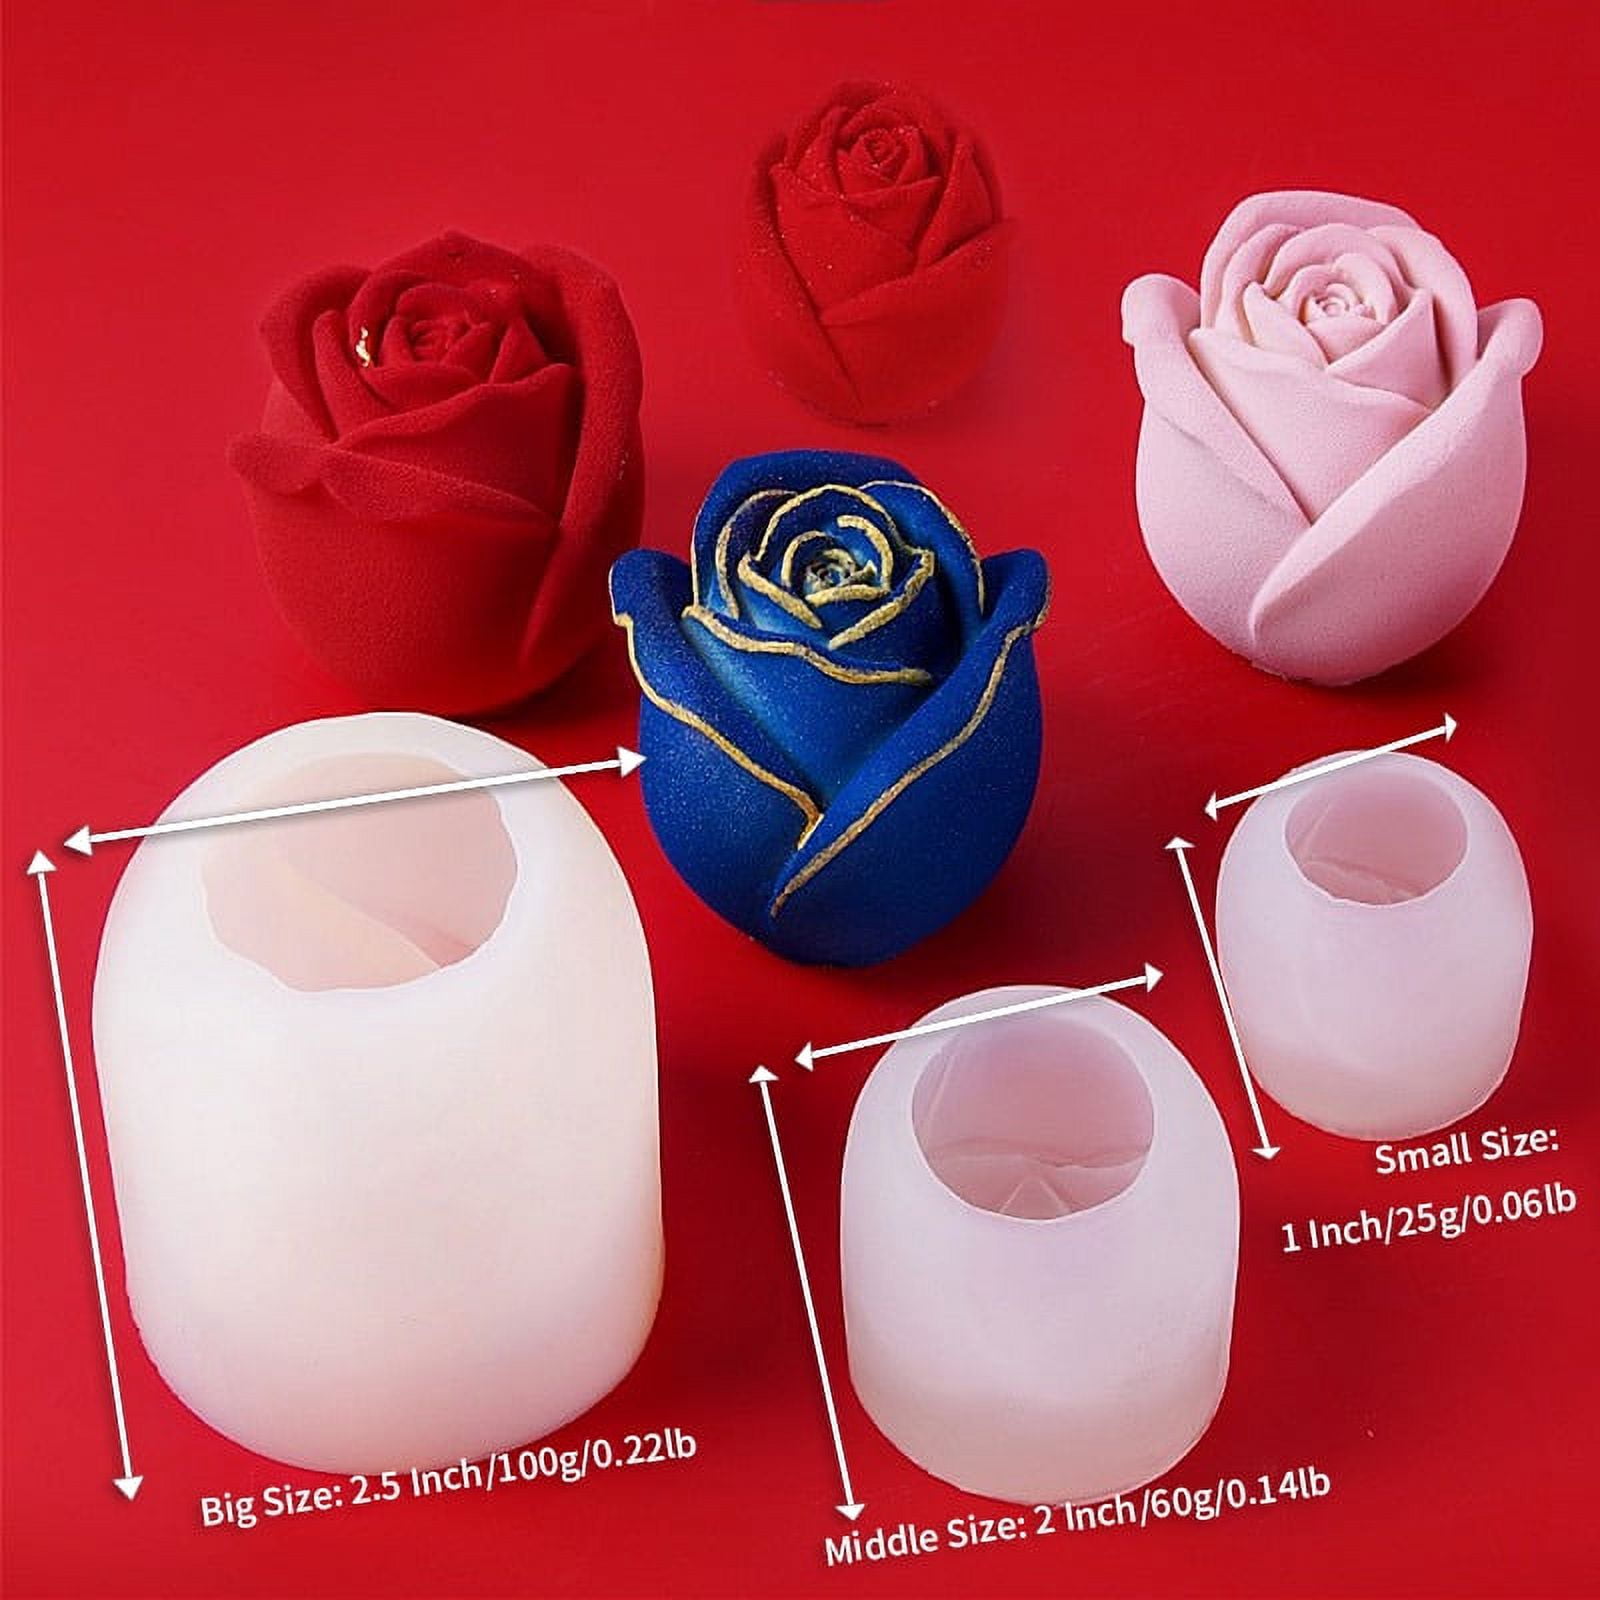 3D Rose Ice Molds 2.5 Inch, Large Ice Cube Trays, Make 4 Giant Cute Flower  Shape Ice, Silicone Rubber DIY Fun Big Ice Ball Maker - AliExpress